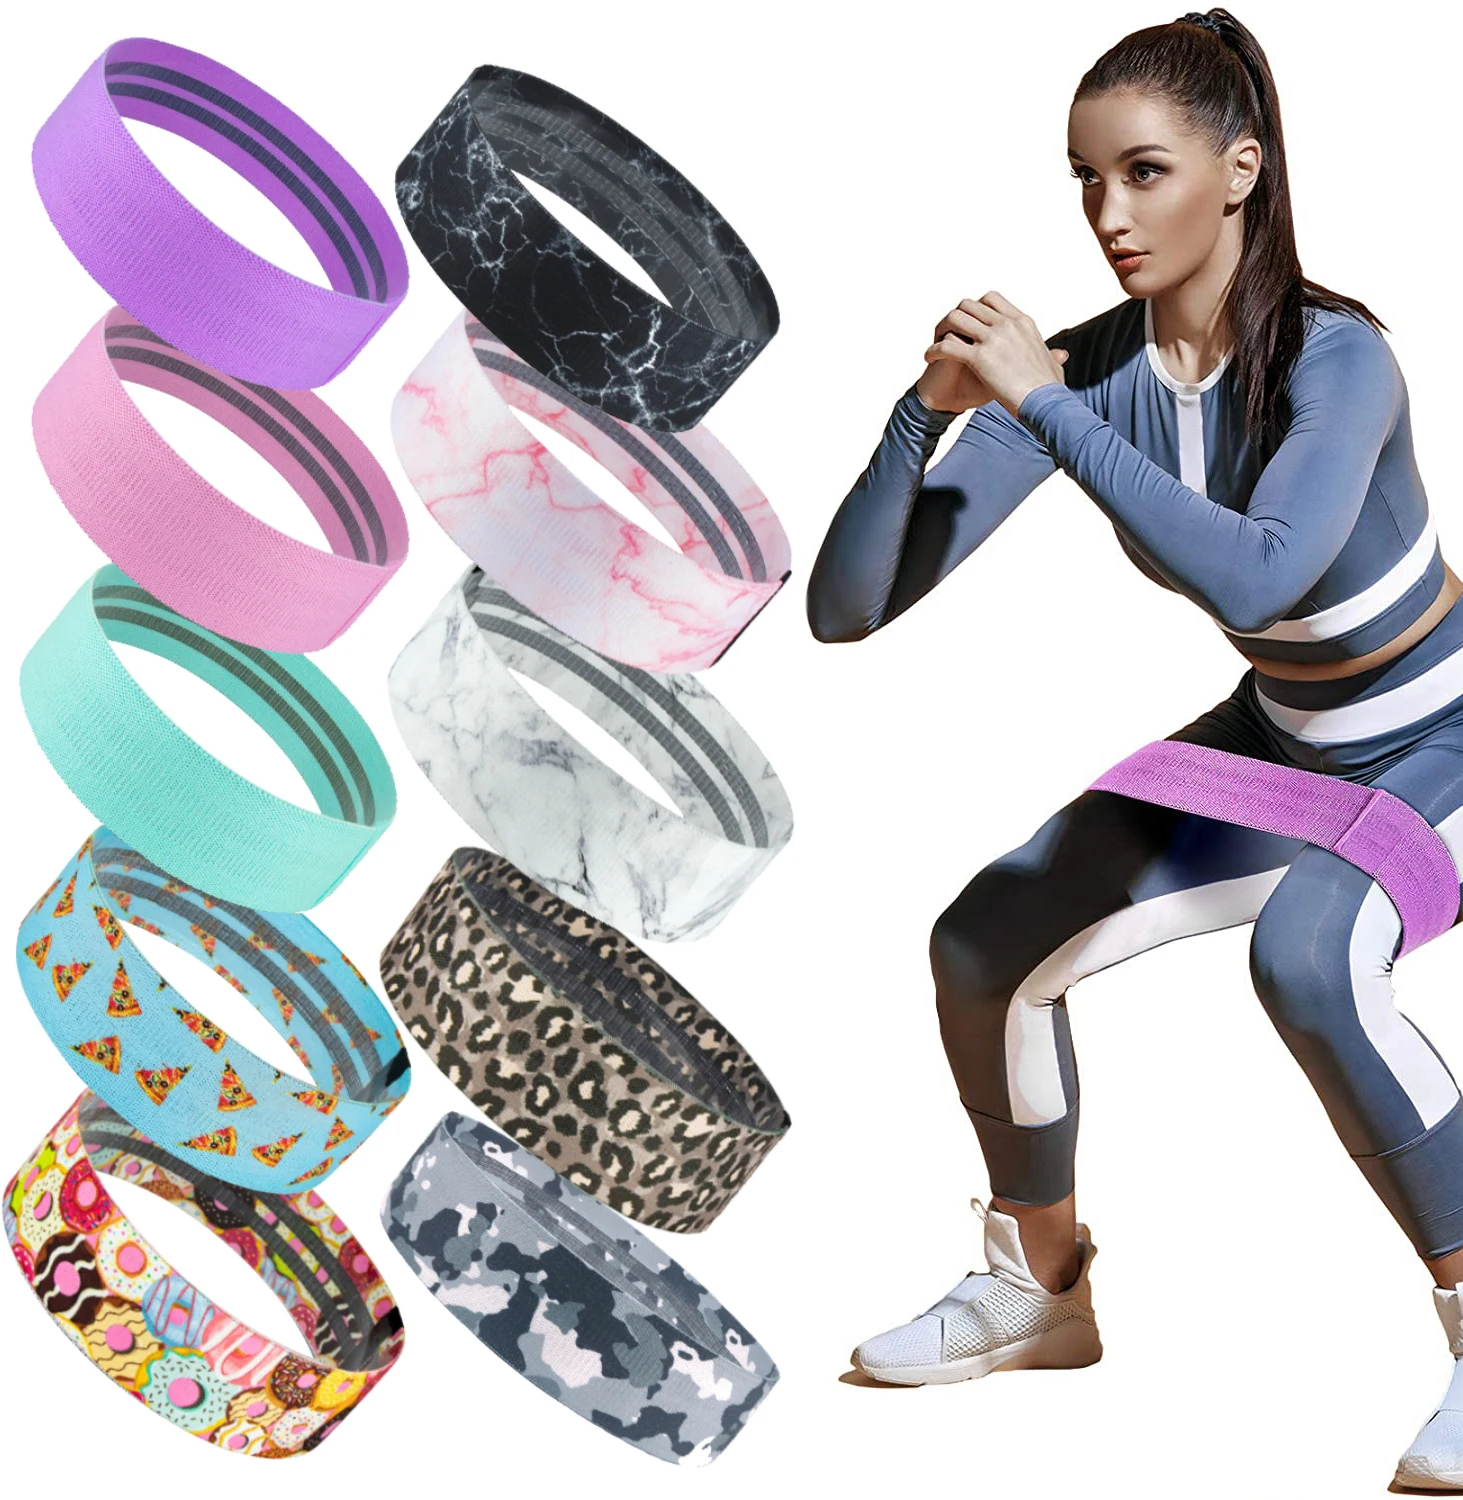 

Wholesale Home Workout power band fitness custom printing fabric booty band sets for legs and butt, Pink or customized color